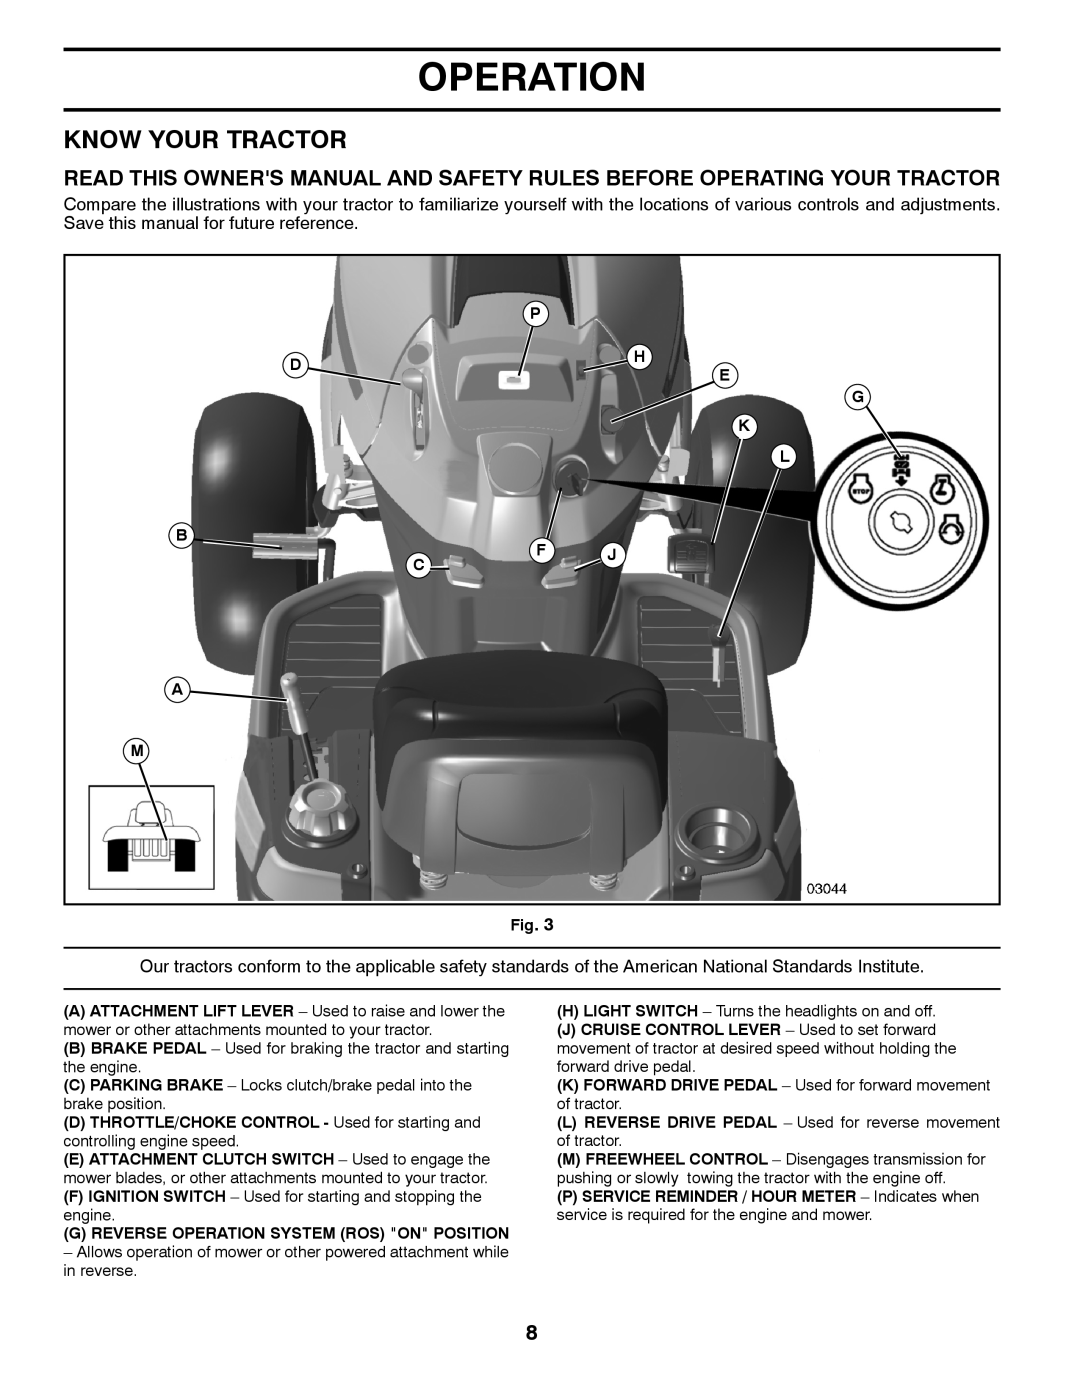 Husqvarna 96045003000 Know Your Tractor, P Dh E, B A M, G K L Cf J, G Reverse Operation System Ros On Position 